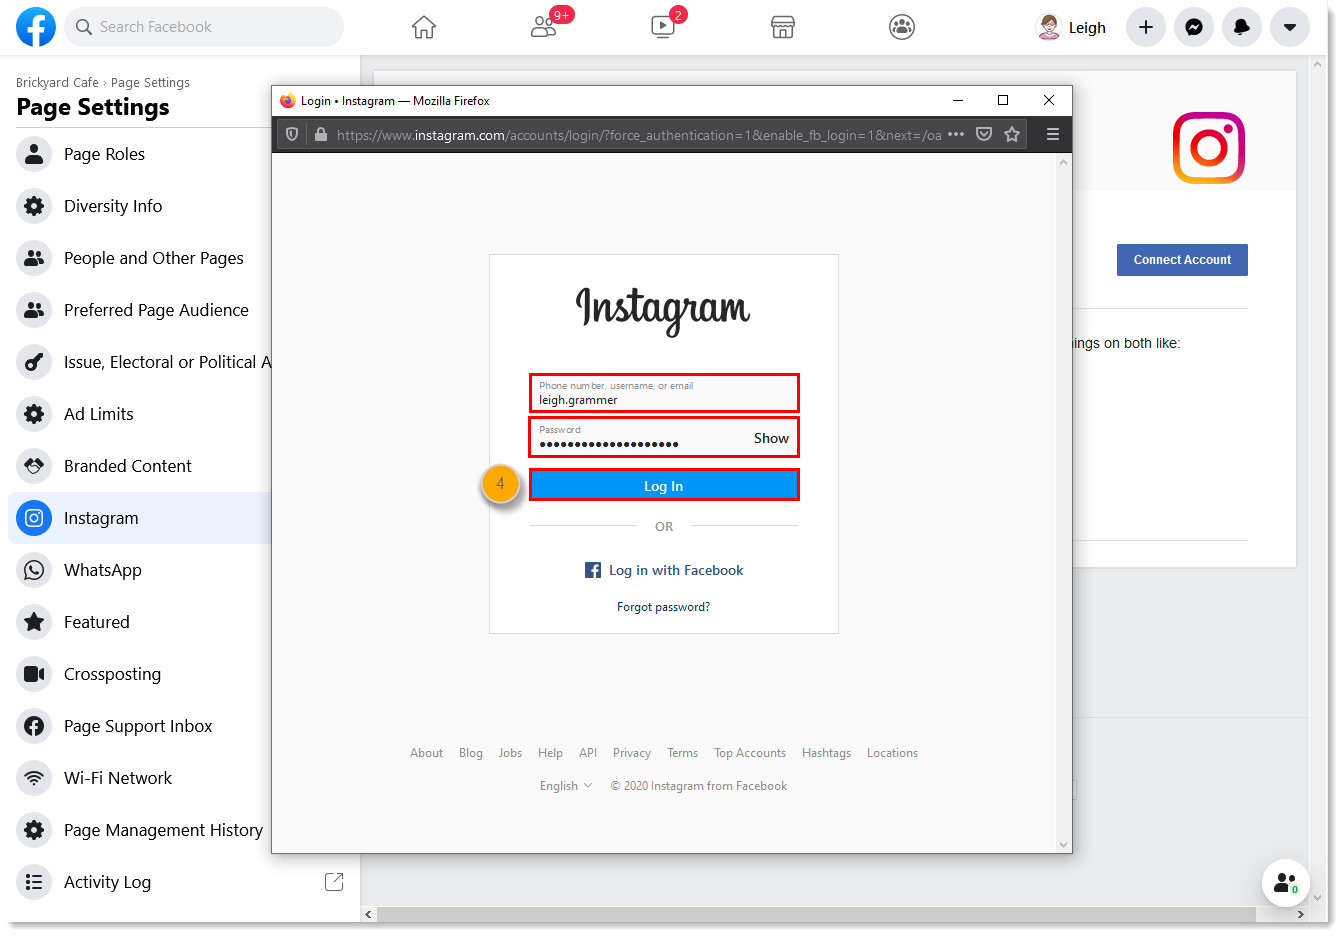 Instagram username and password fields, and Log In button